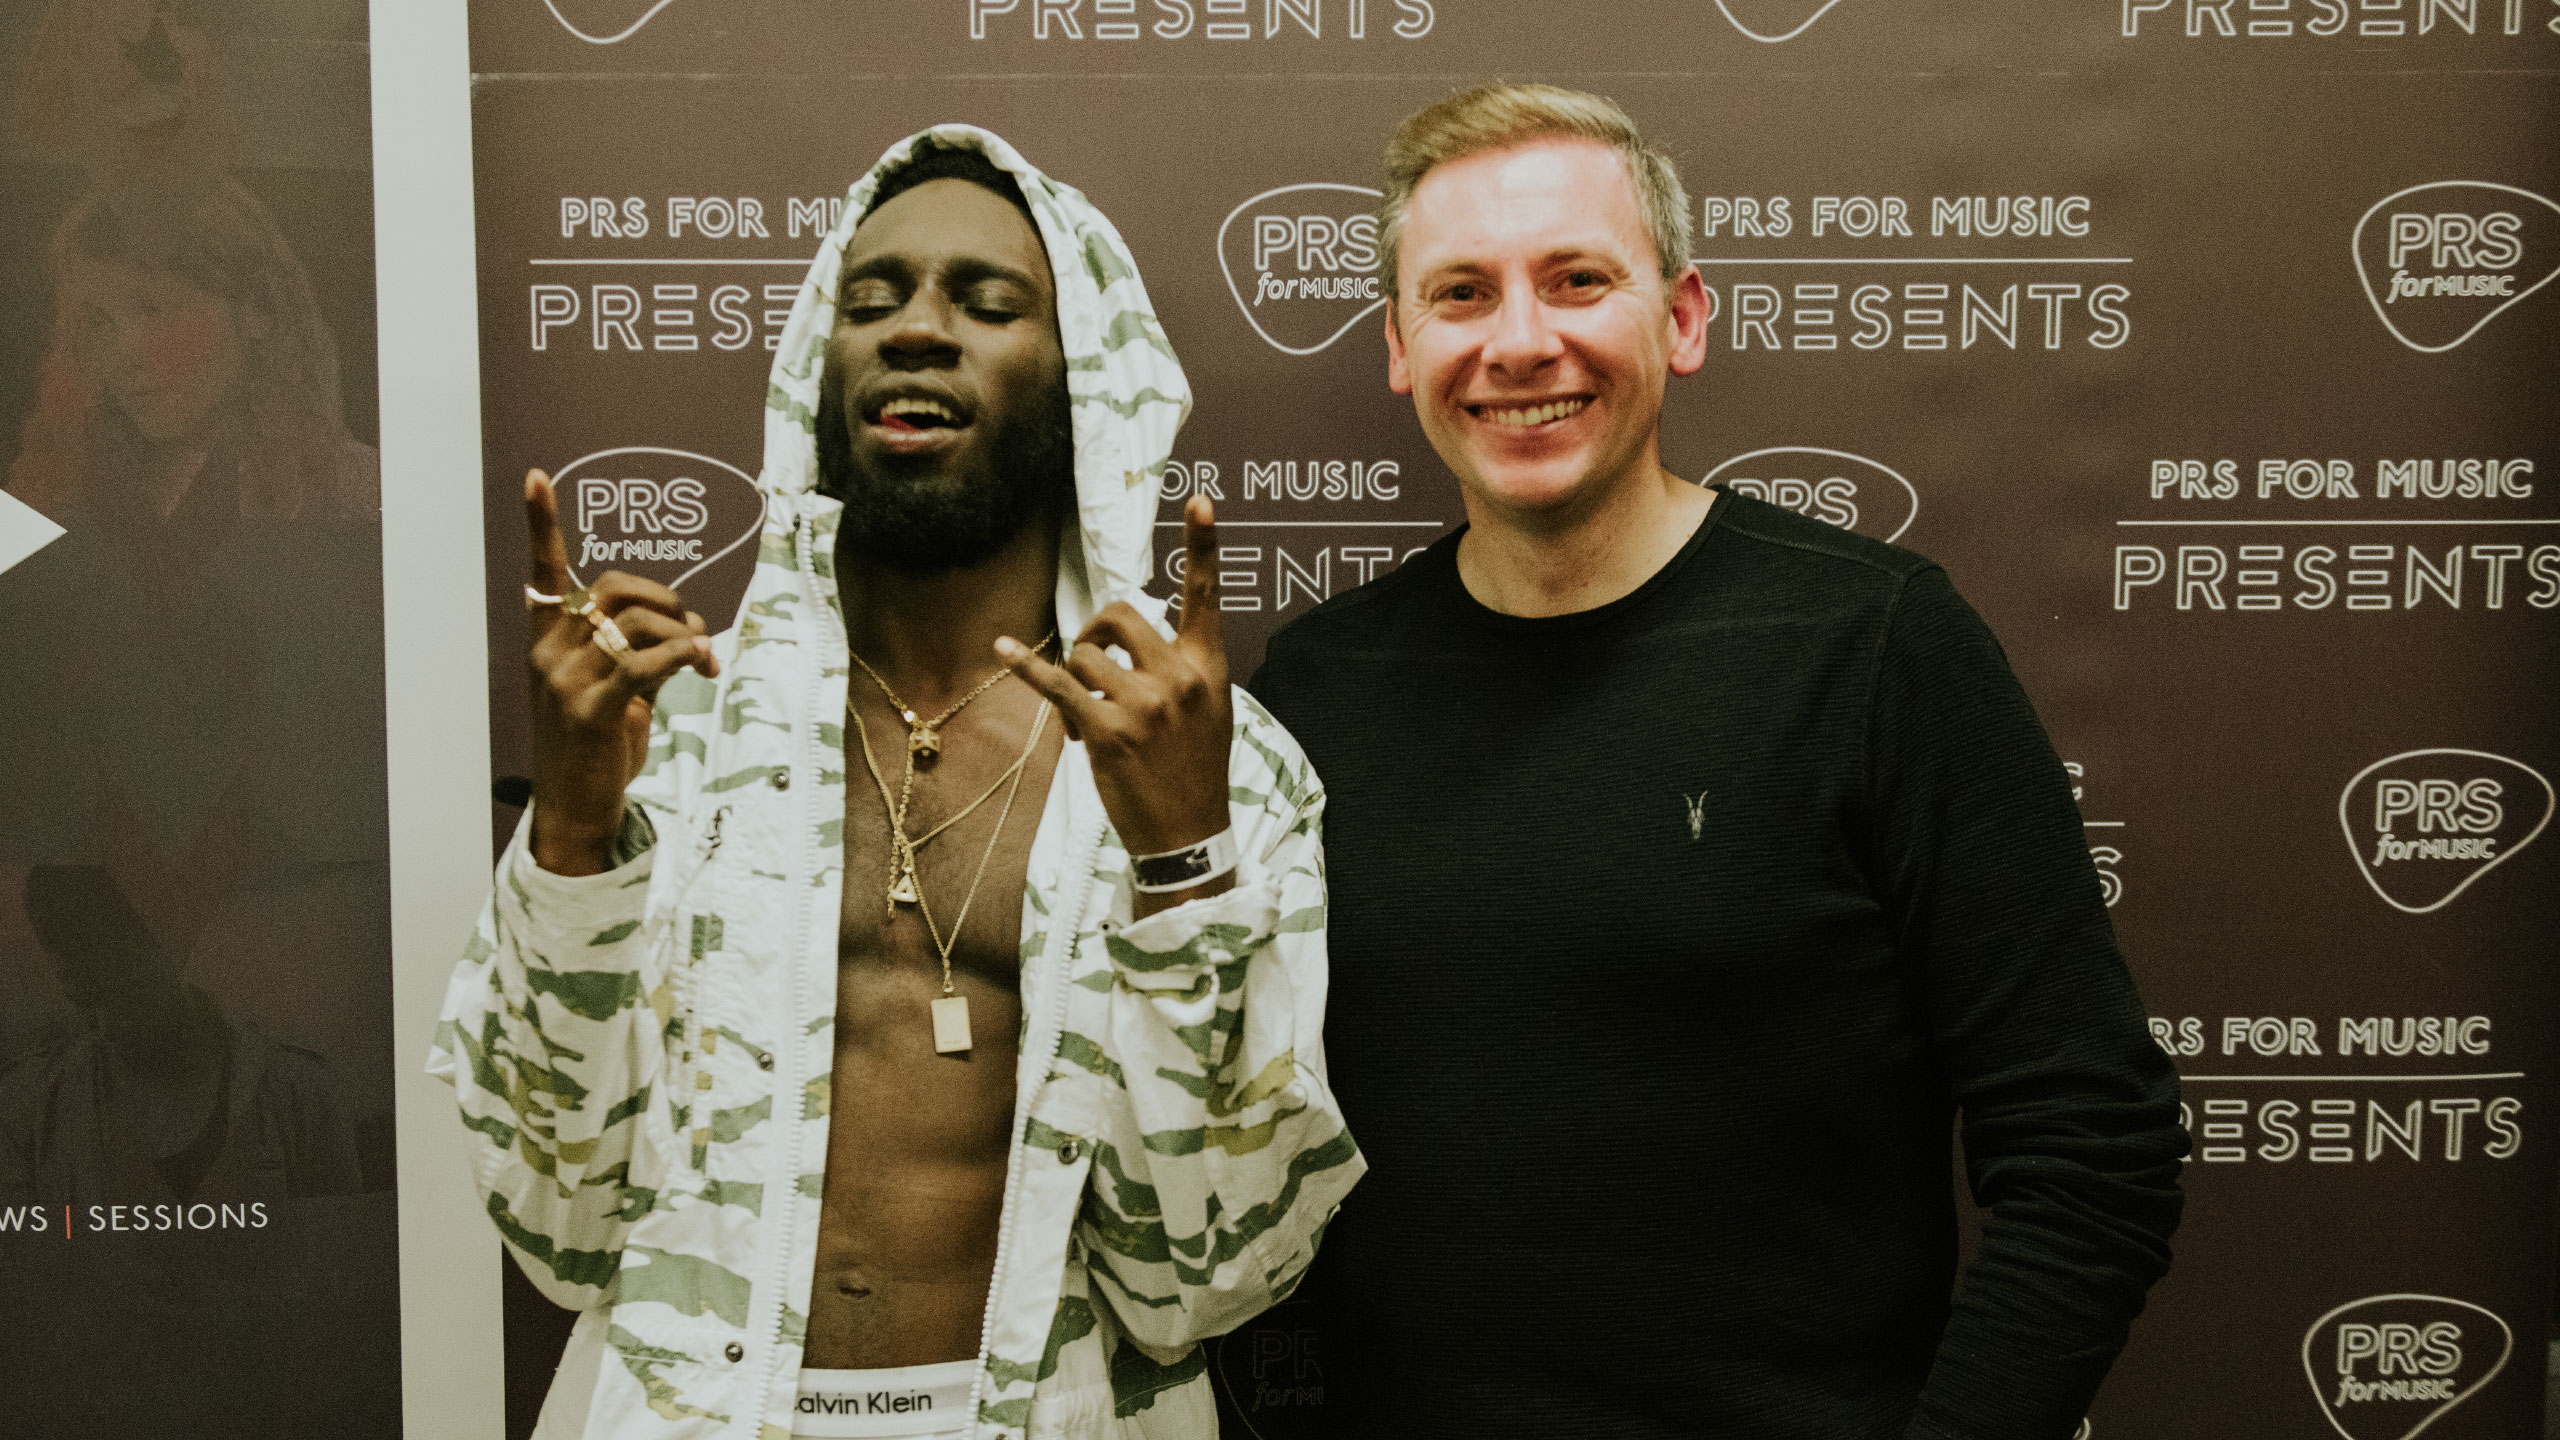 Kojey Radical and Paul Clements (Commercial Director) at PRS for Music Presents 2nd Birthday